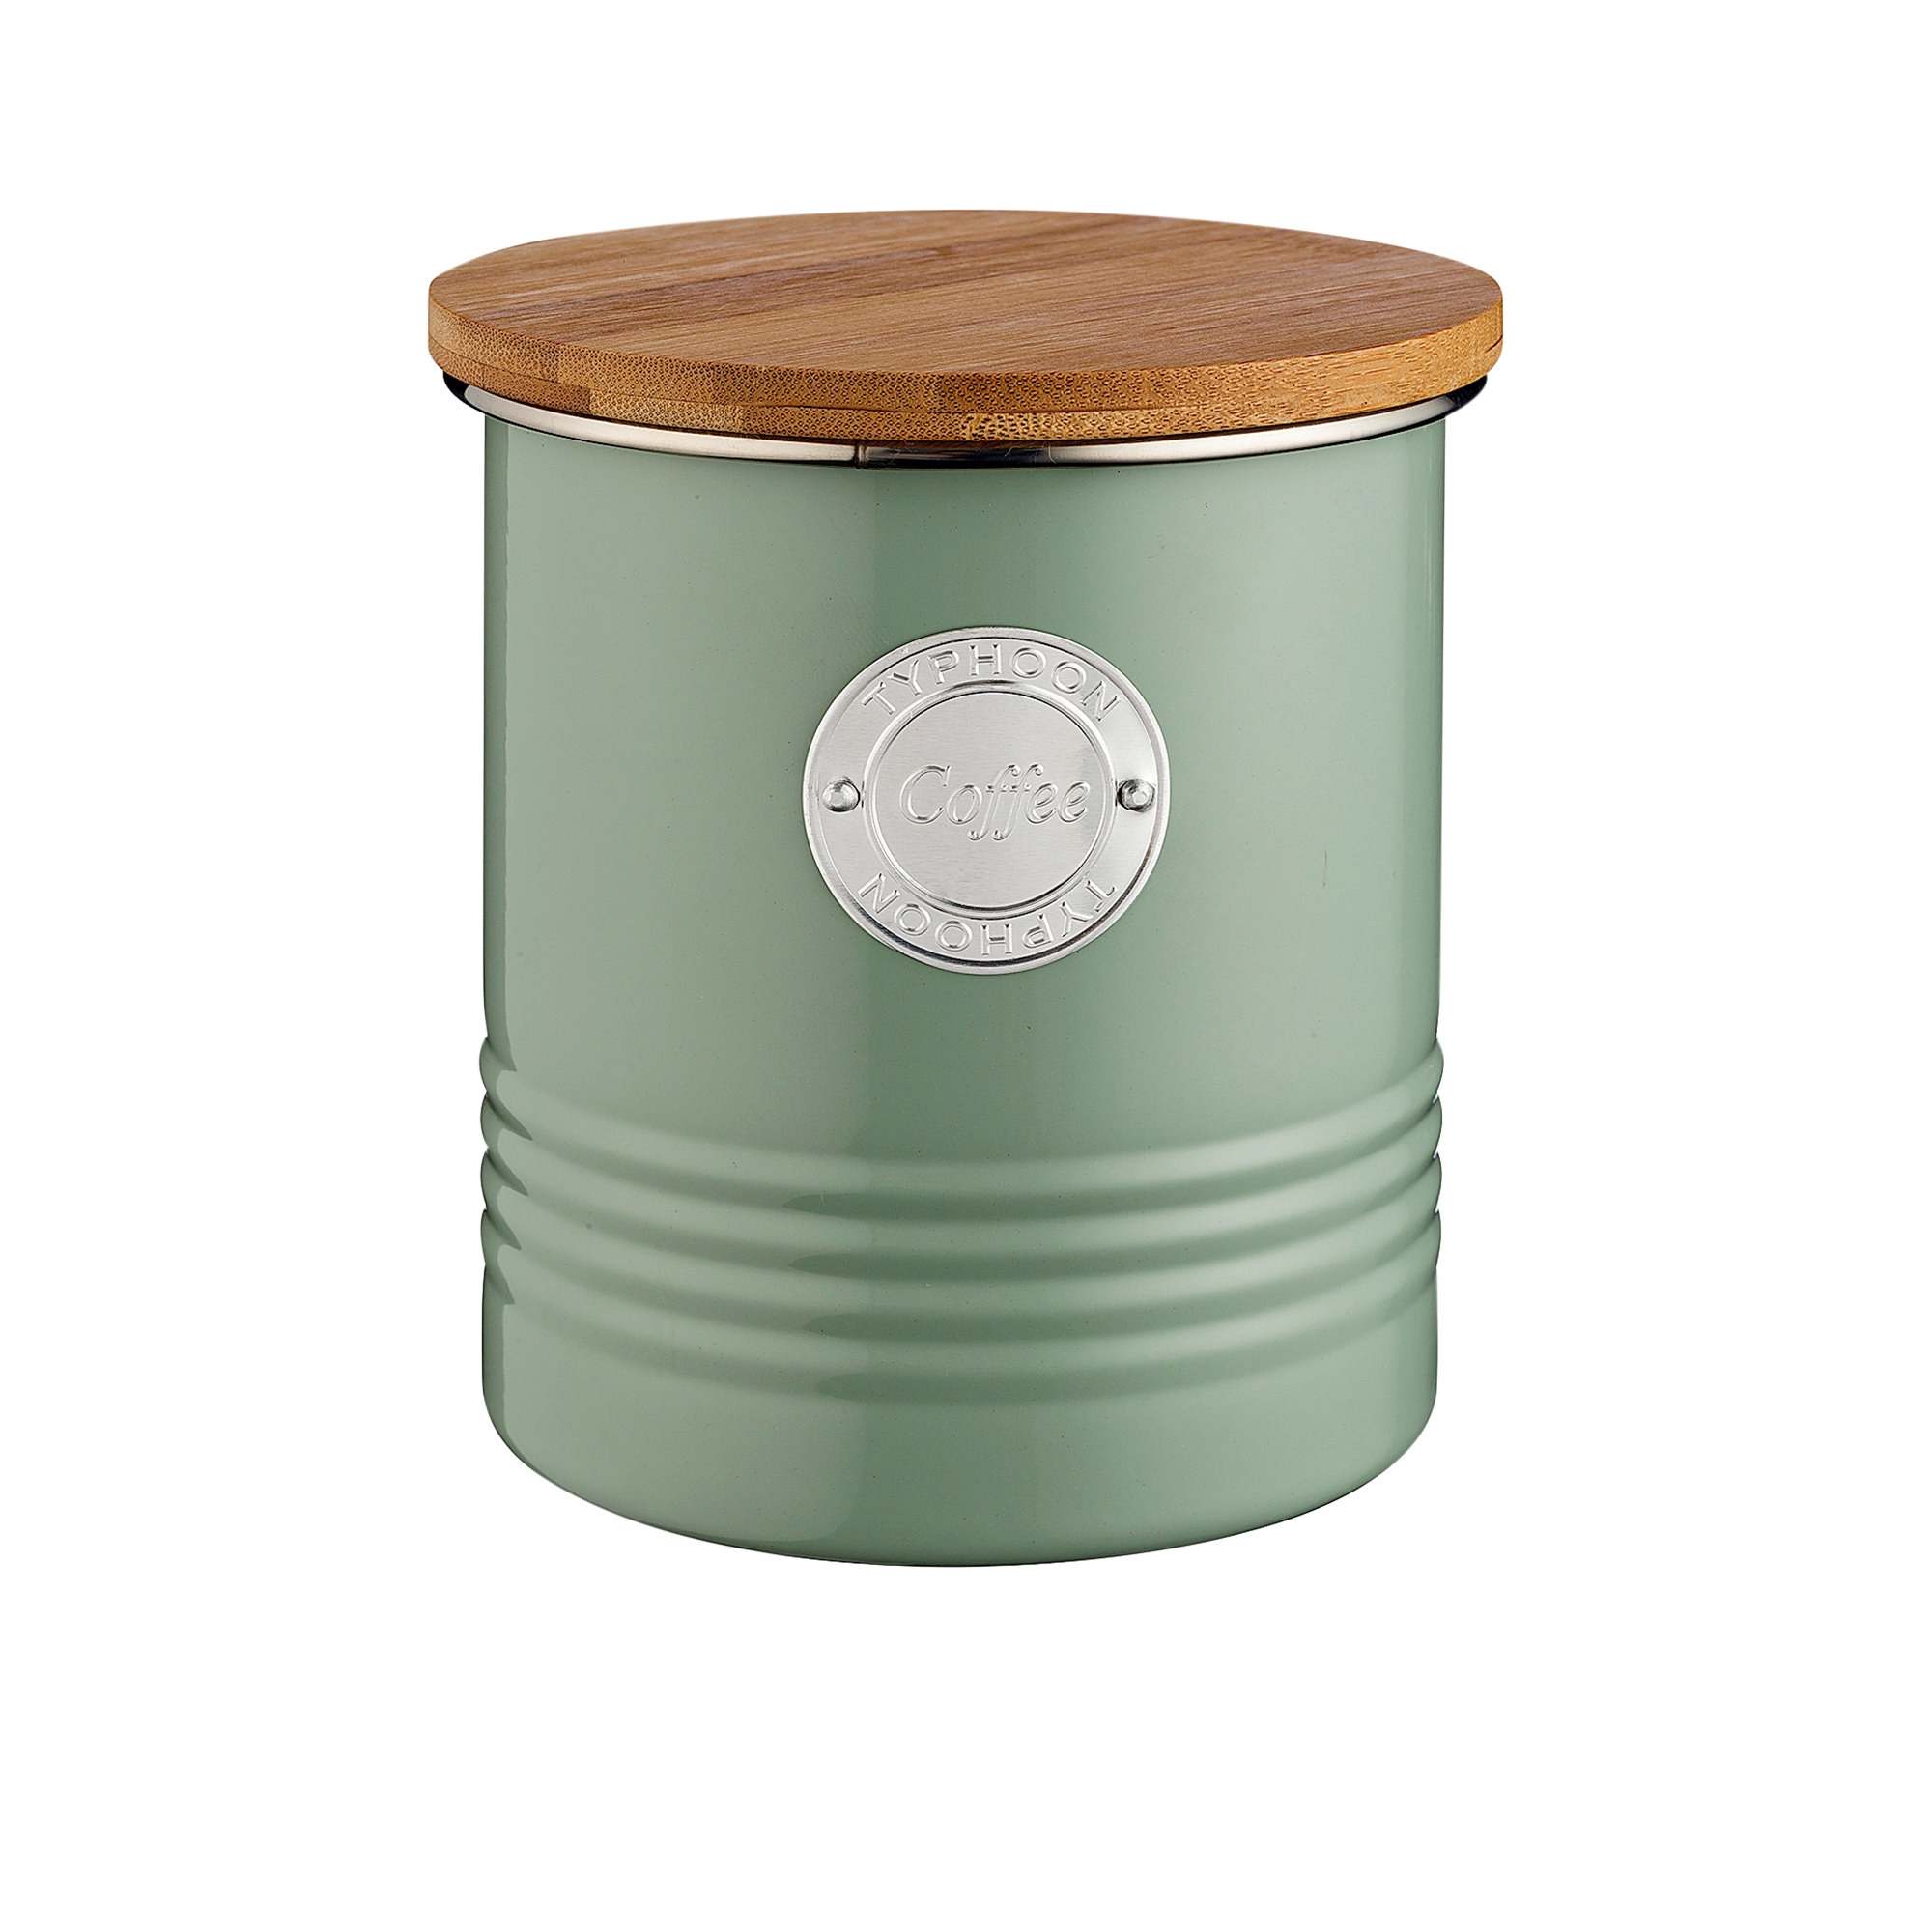 Typhoon Living Coffee Canister 1L Sage Image 1